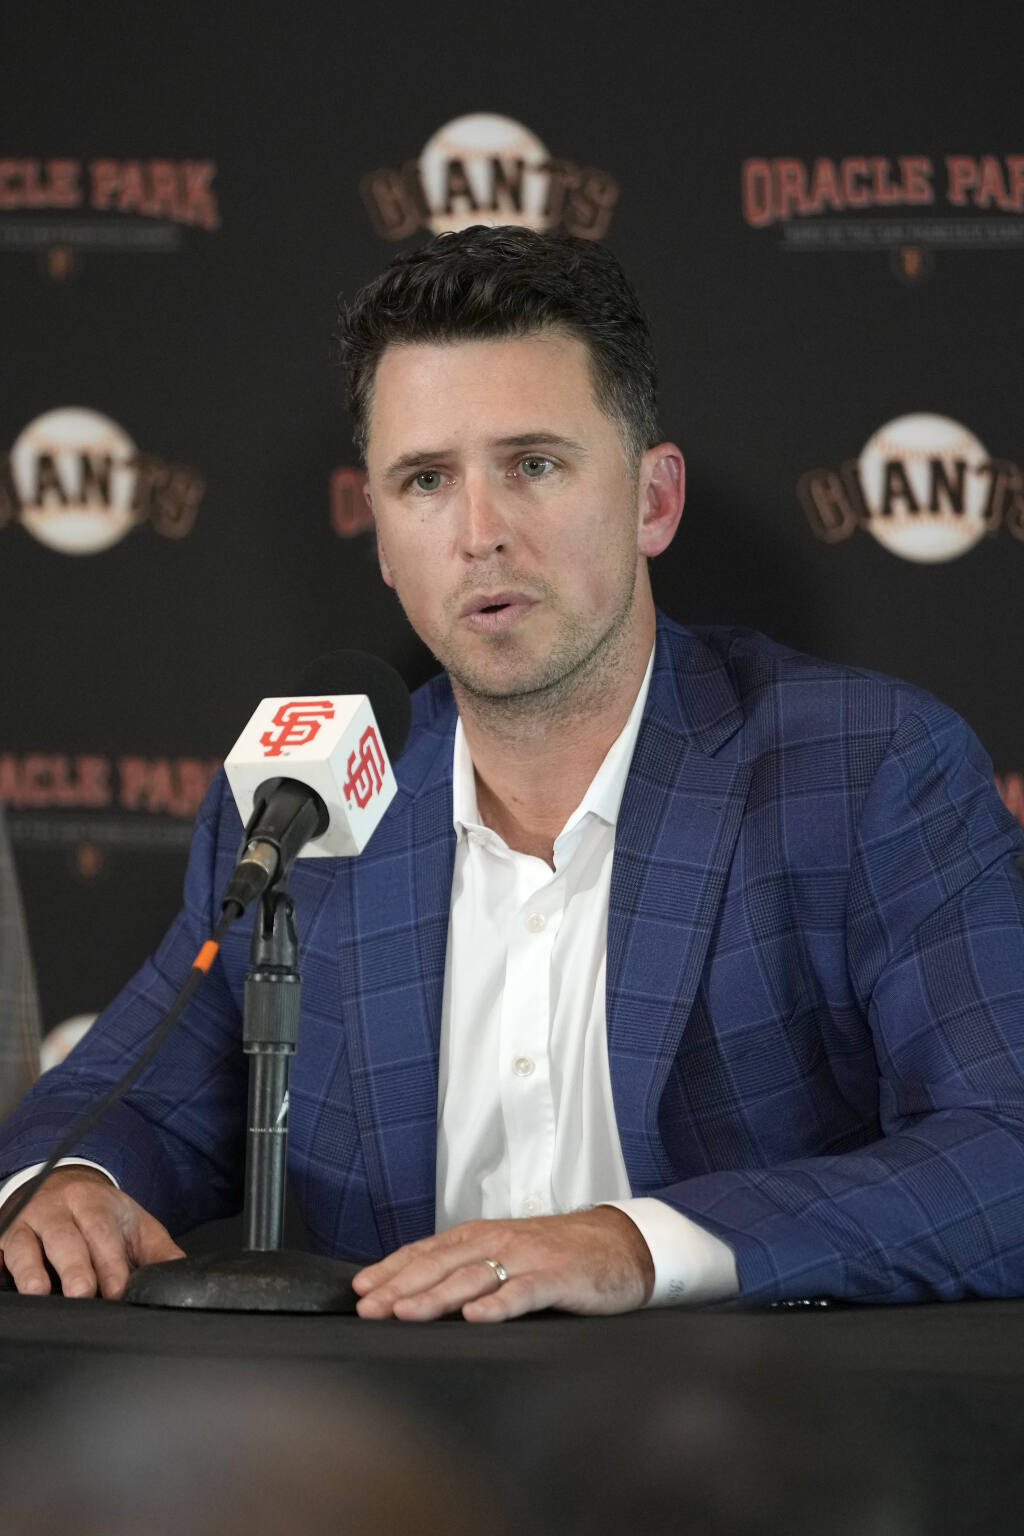 Retired Giants catcher Buster Posey going back to school to finish degree  from Florida State - CBS San Francisco